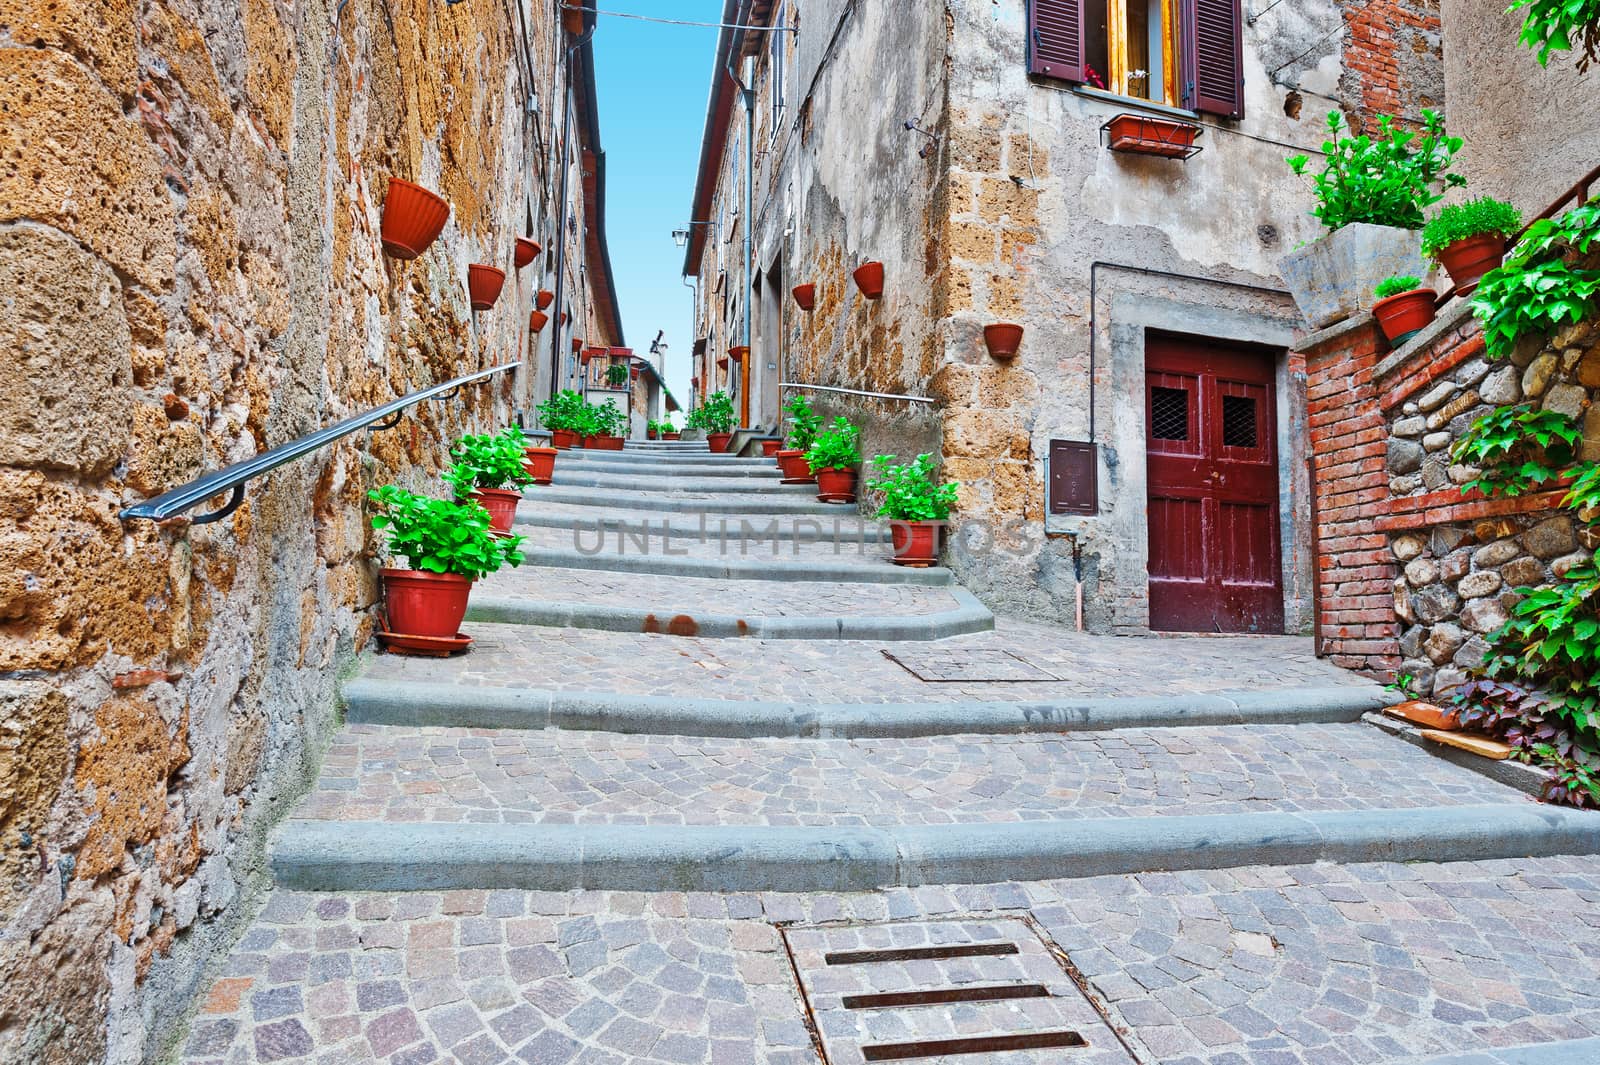 Staircase of the Narrow Street with Old Buildings in the Medieval Italian City 